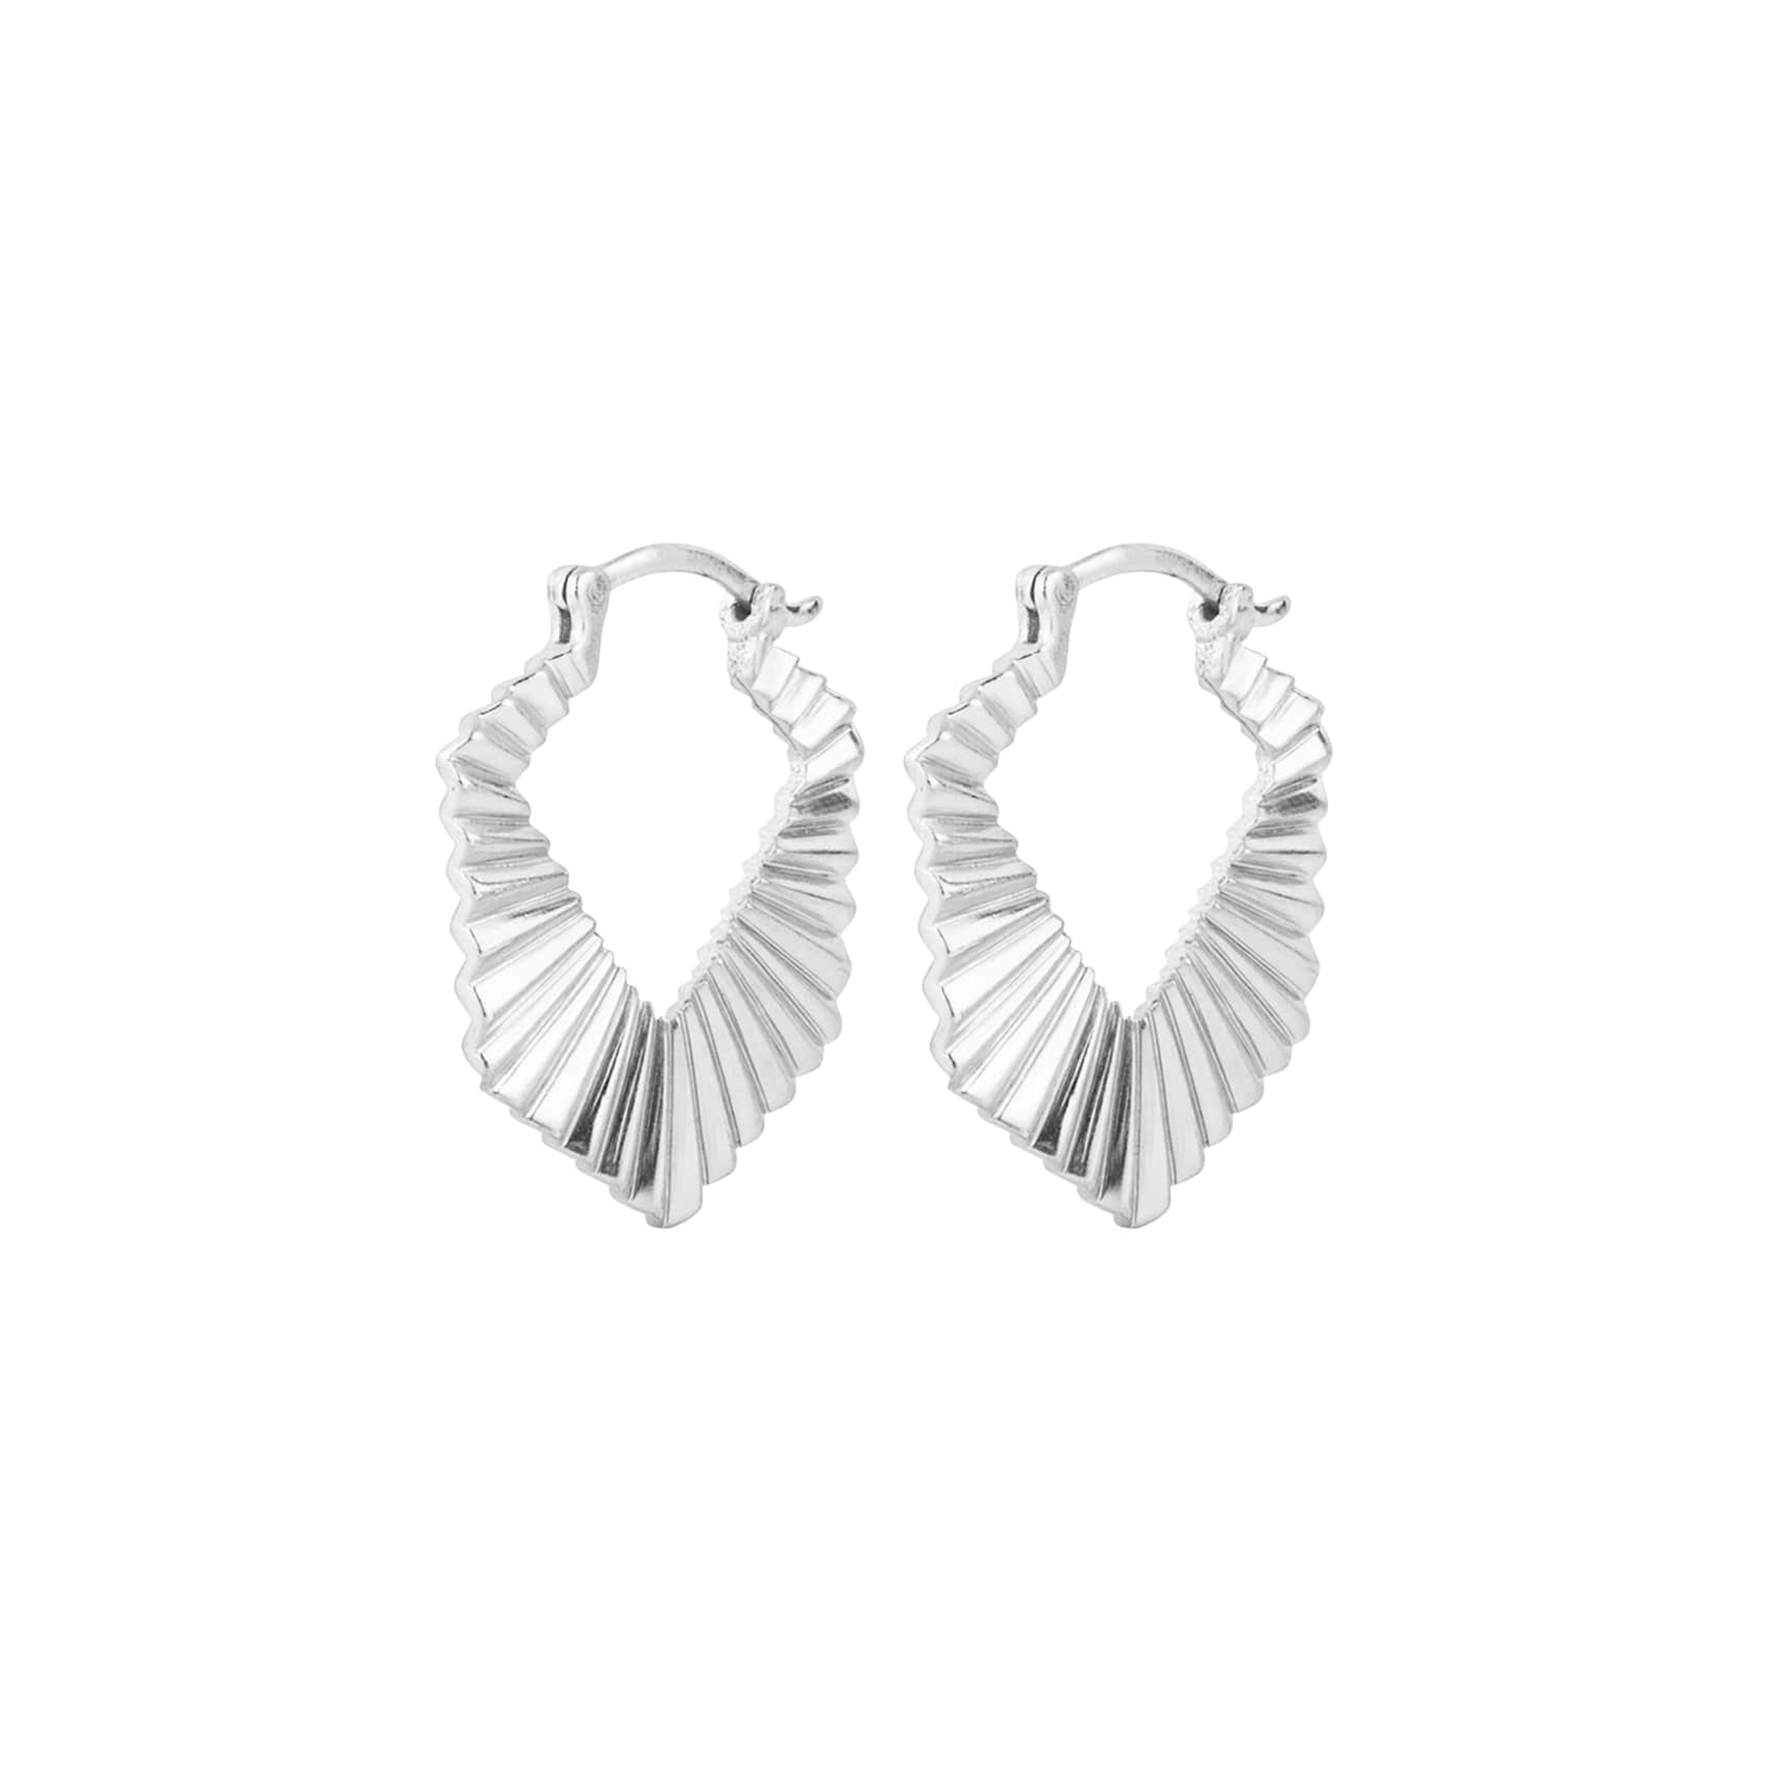 Celestial Horizon Earrings from House Of Vincent in Silver Sterling 925